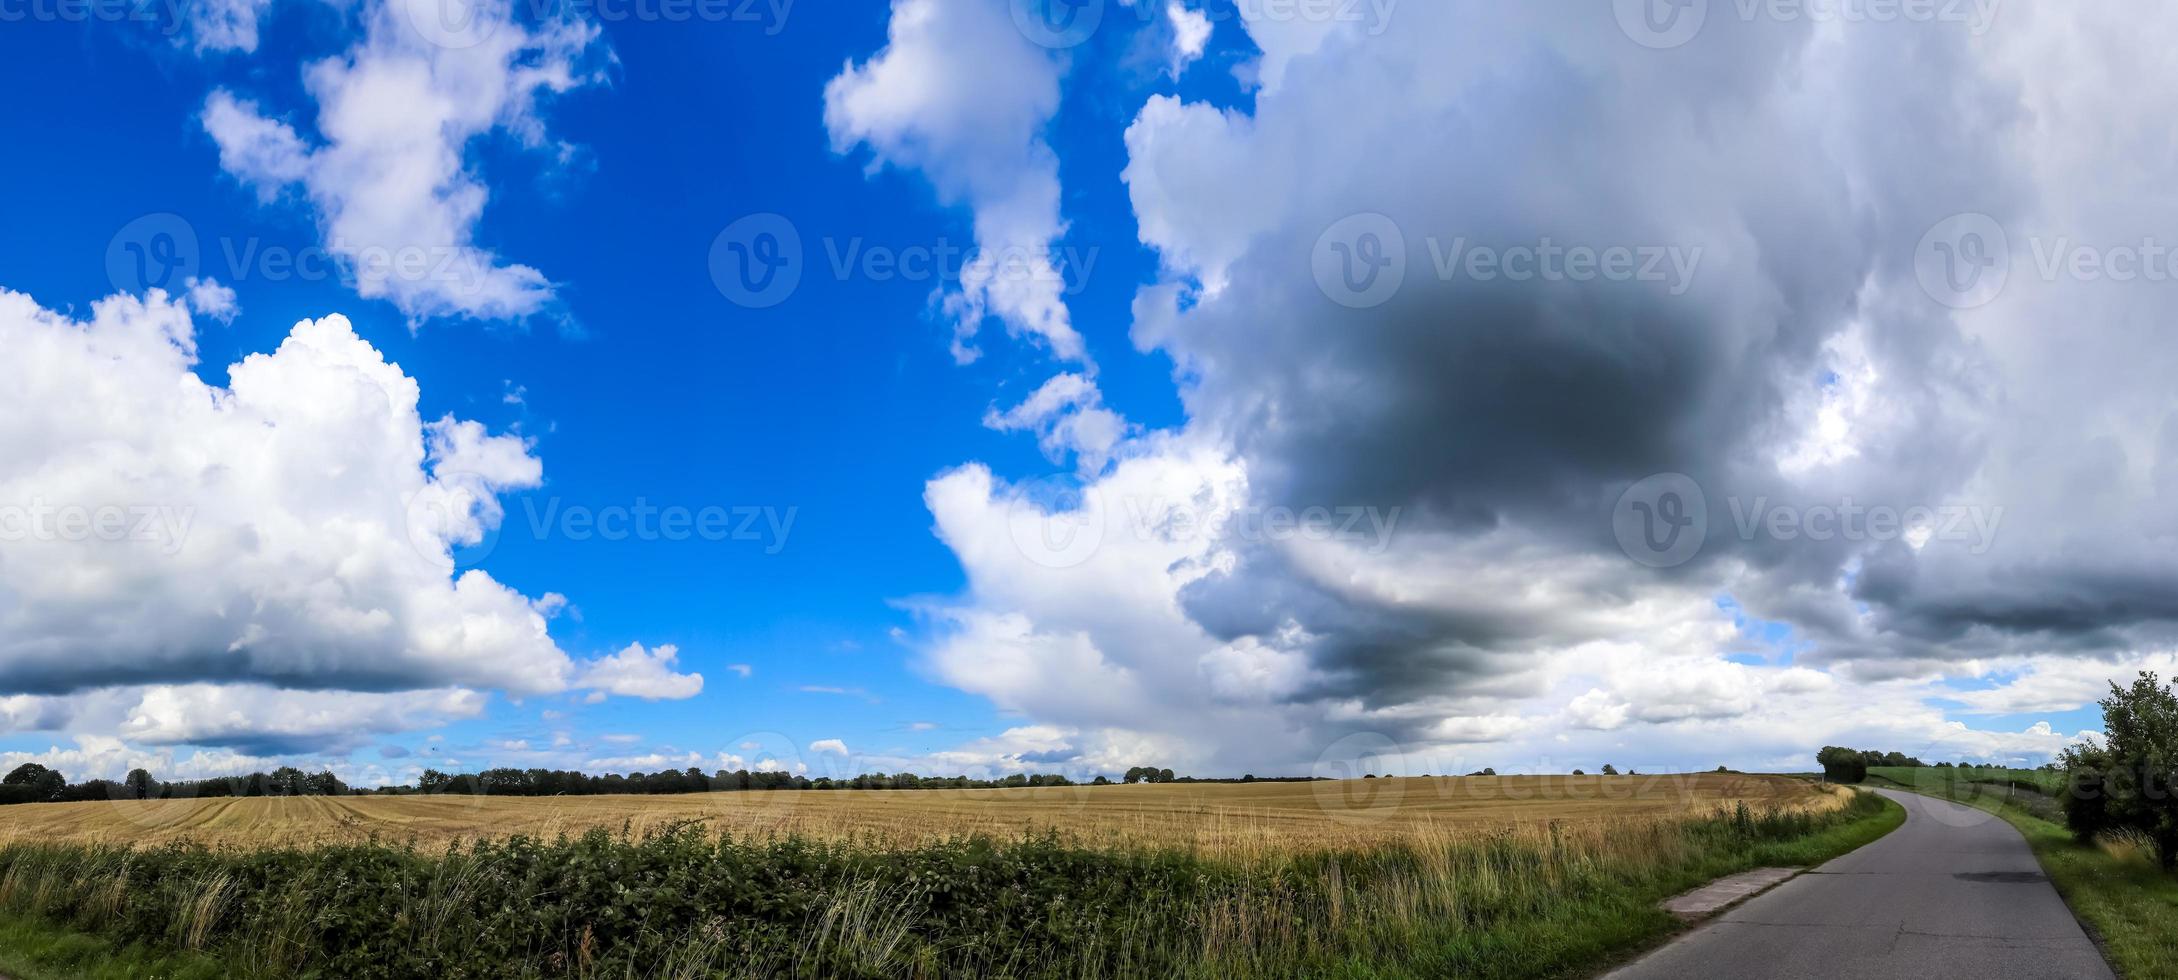 Beautiful high resolution panorama of a landscape with fields and green grass found in Denmark and Germany. photo